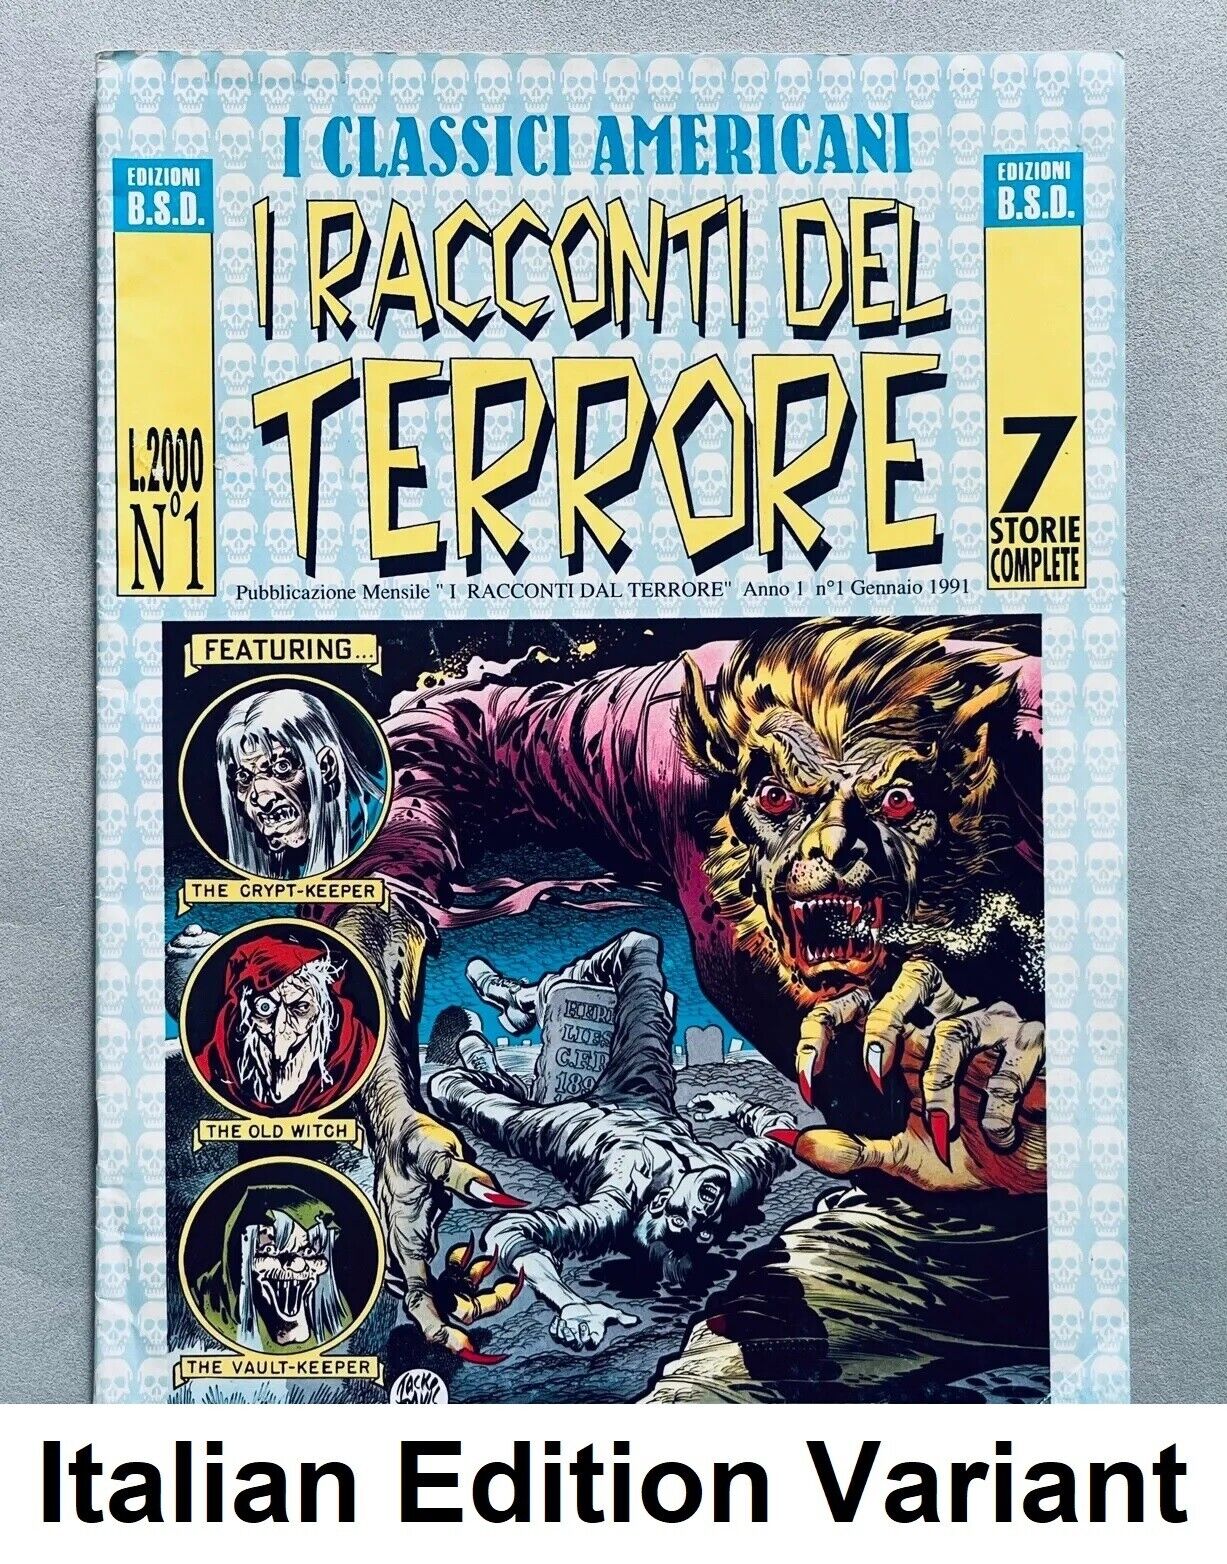 Tales from the Crypt #35 Horror Golden Age 1953 Rare Variant Italian Edition